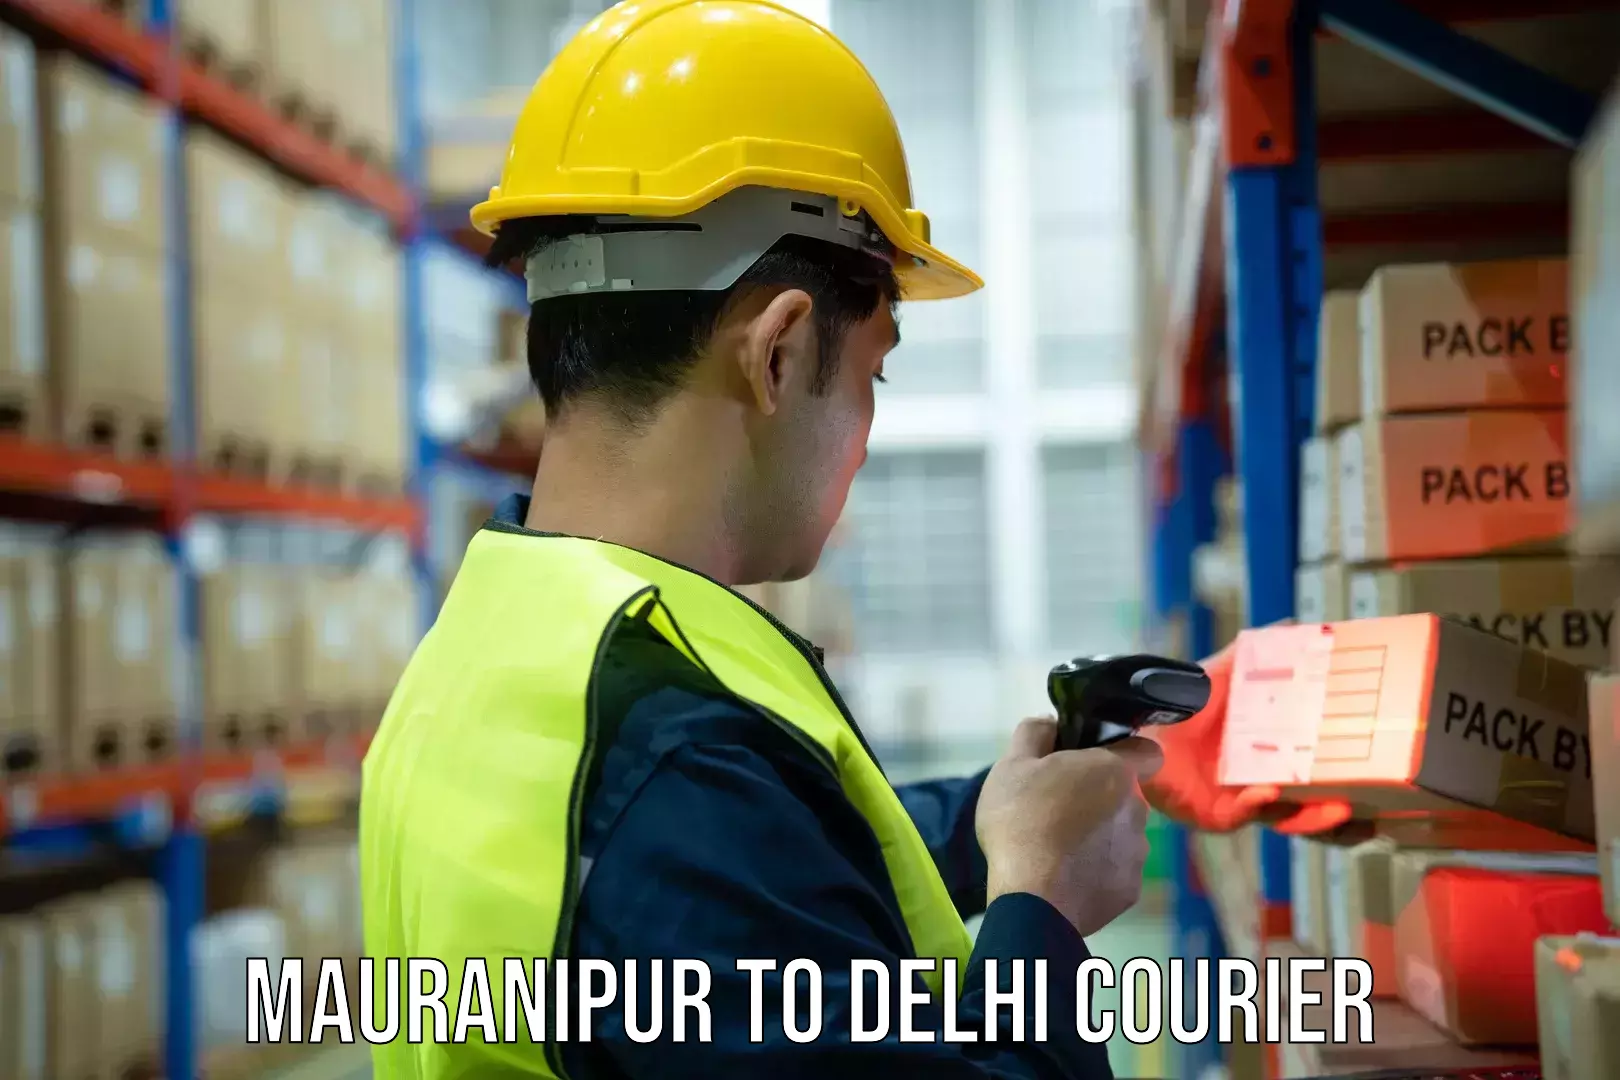 Express mail service Mauranipur to East Delhi